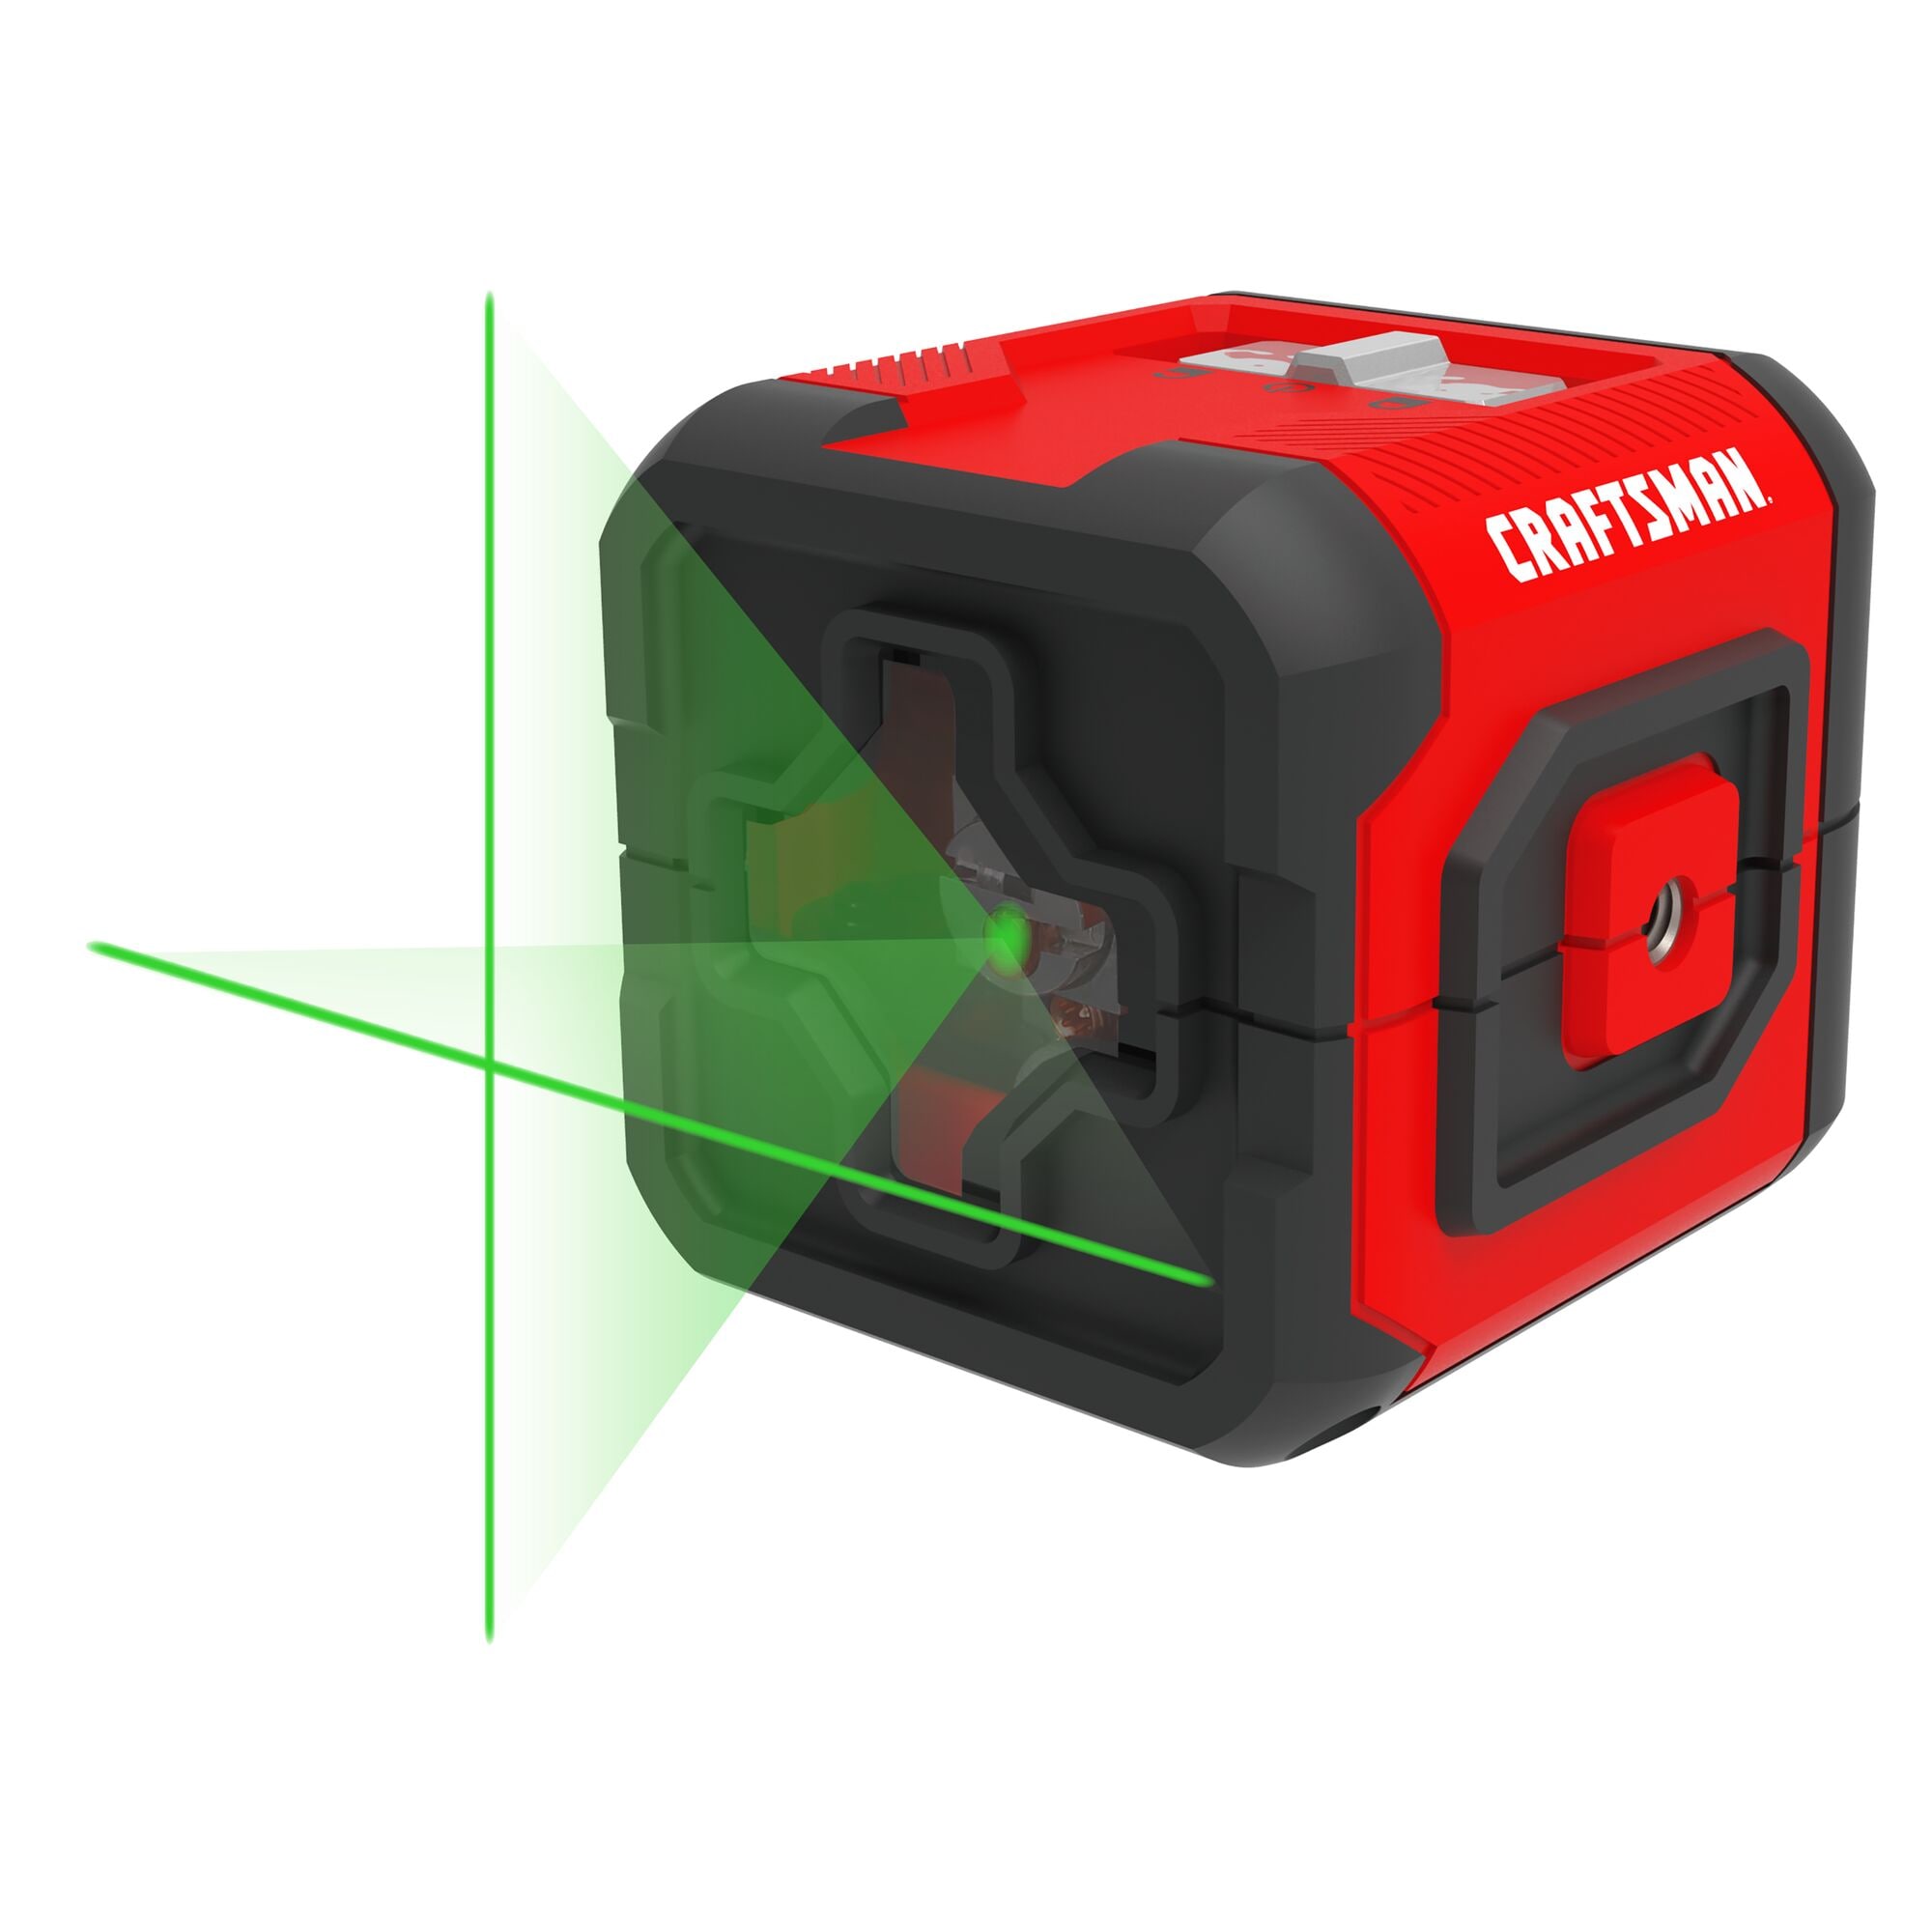 CRAFTSMAN Green 55-ft Self-Leveling Outdoor Line Generator Laser Level with  Cross Beam in the Laser Levels department at